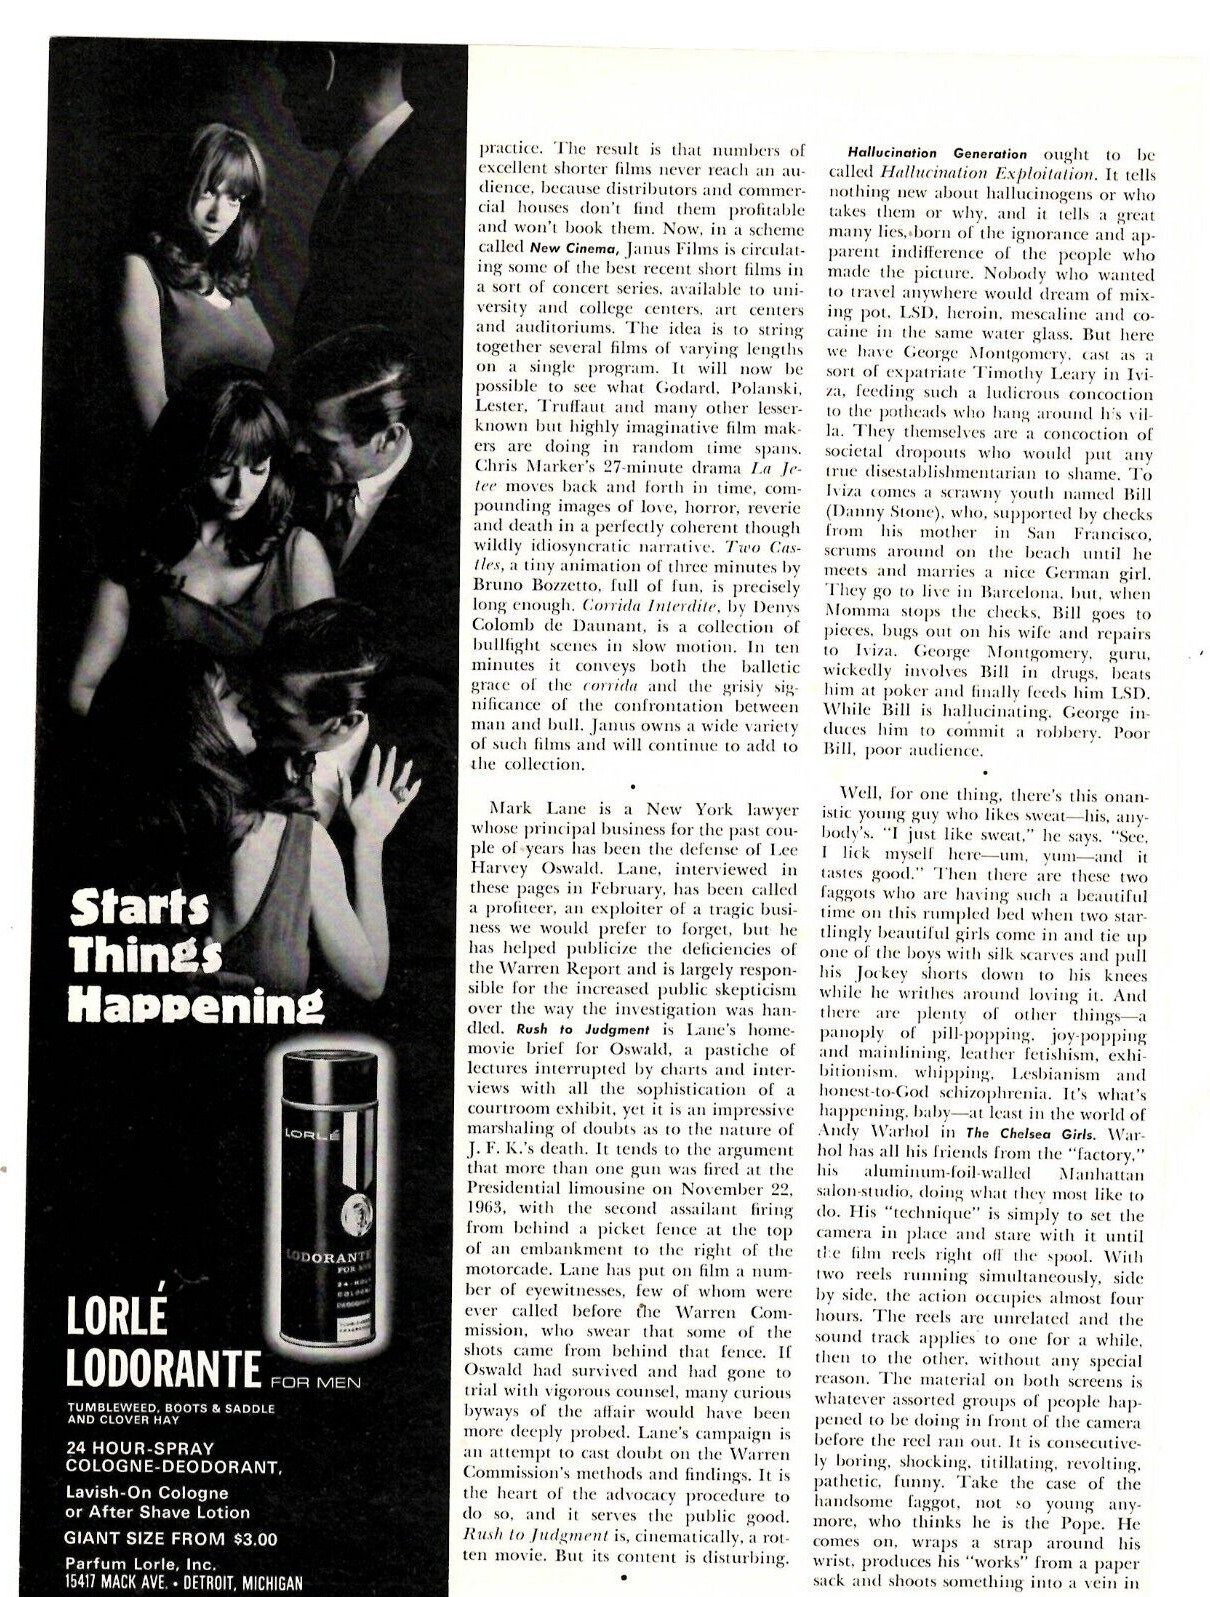 1967 Print Ad Lorle Lodorante for Men Tumbleweed,Boots & Saddle,Clover Hay